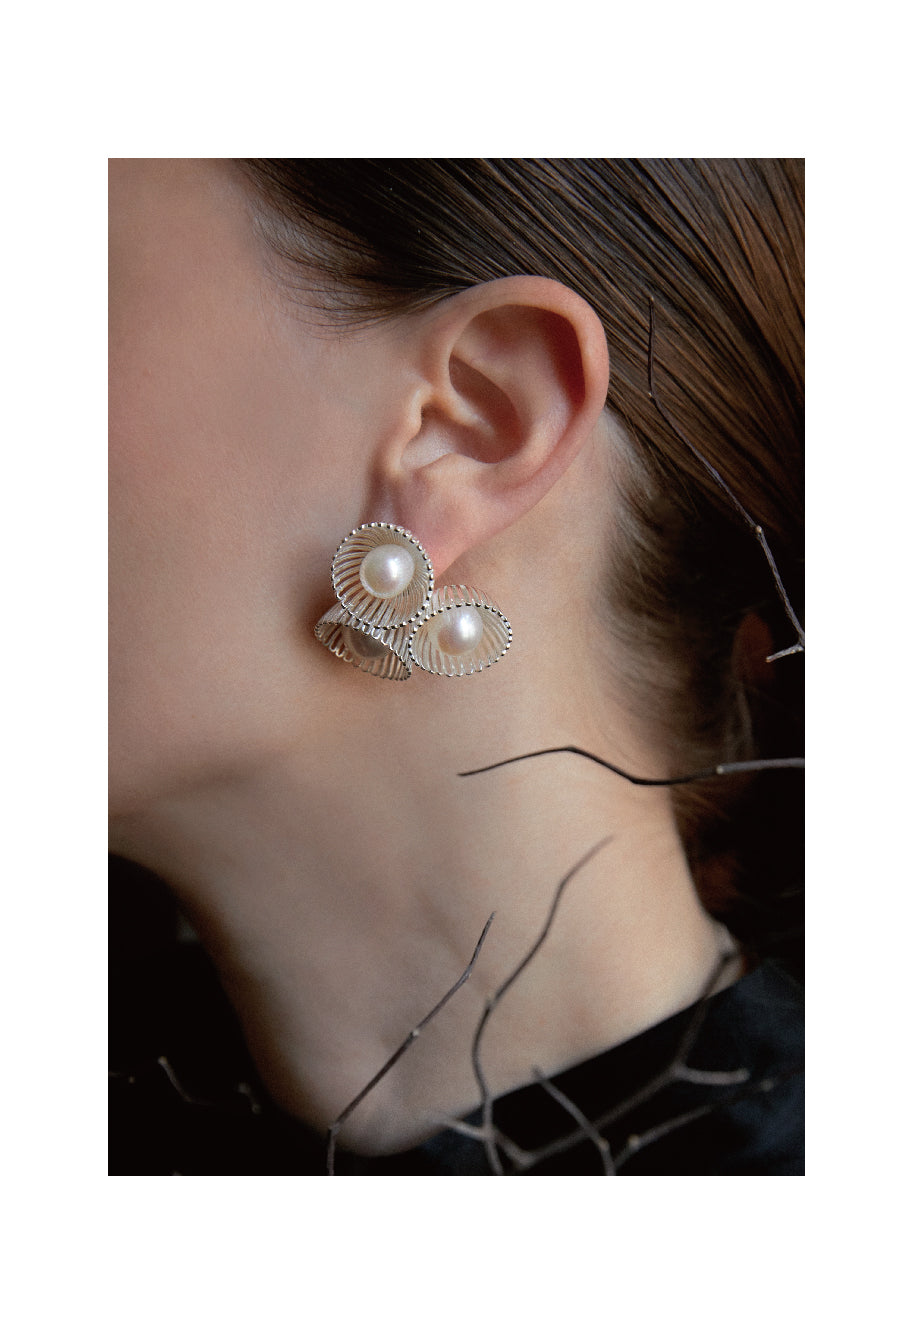 Blooming Earrings – soft mountains